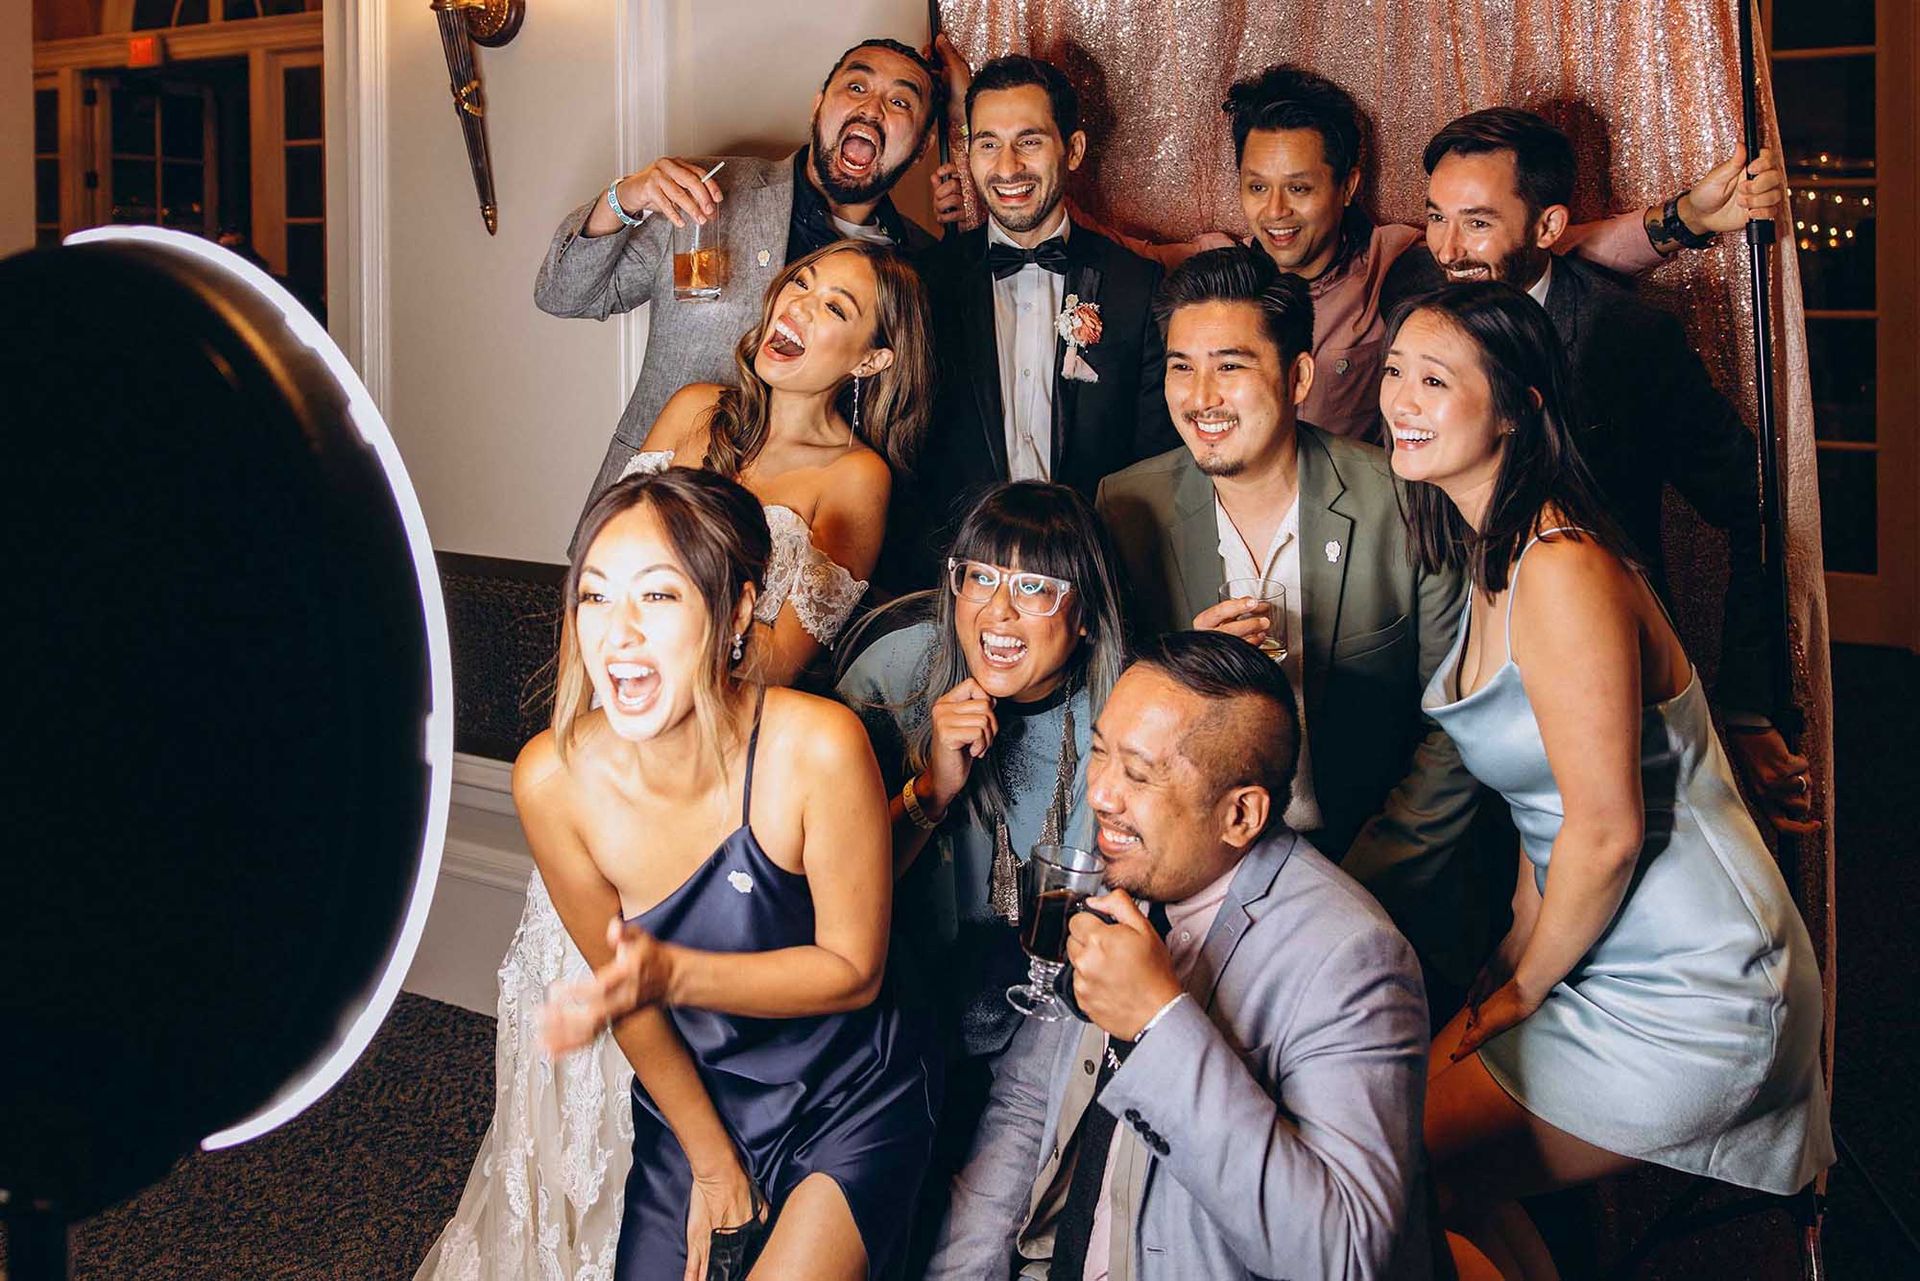 Bride's friends posing for a photo using an iPad selfie photo booth rental at a wedding reception in Atlanta, 